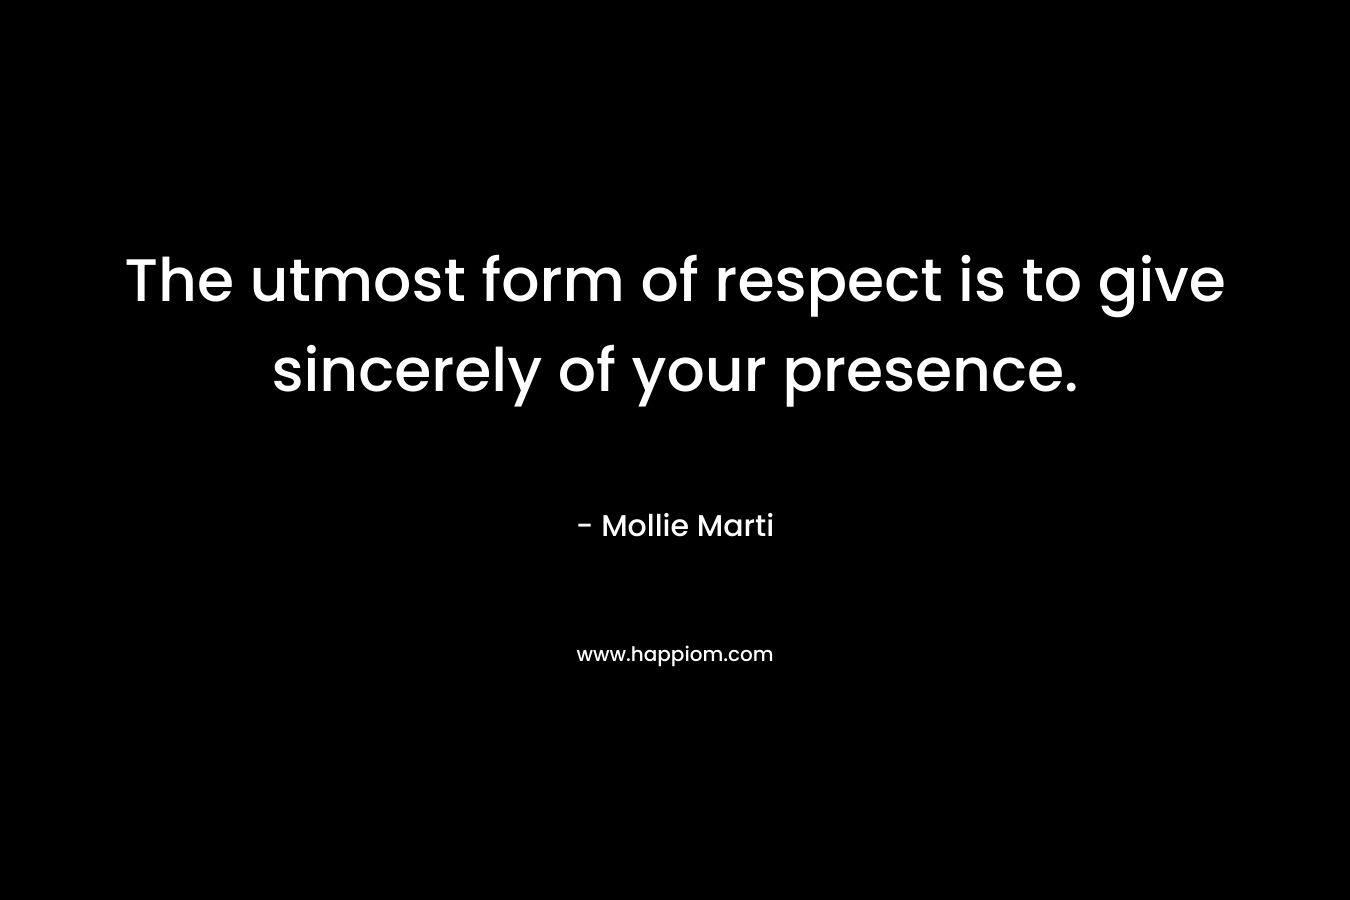 The utmost form of respect is to give sincerely of your presence.